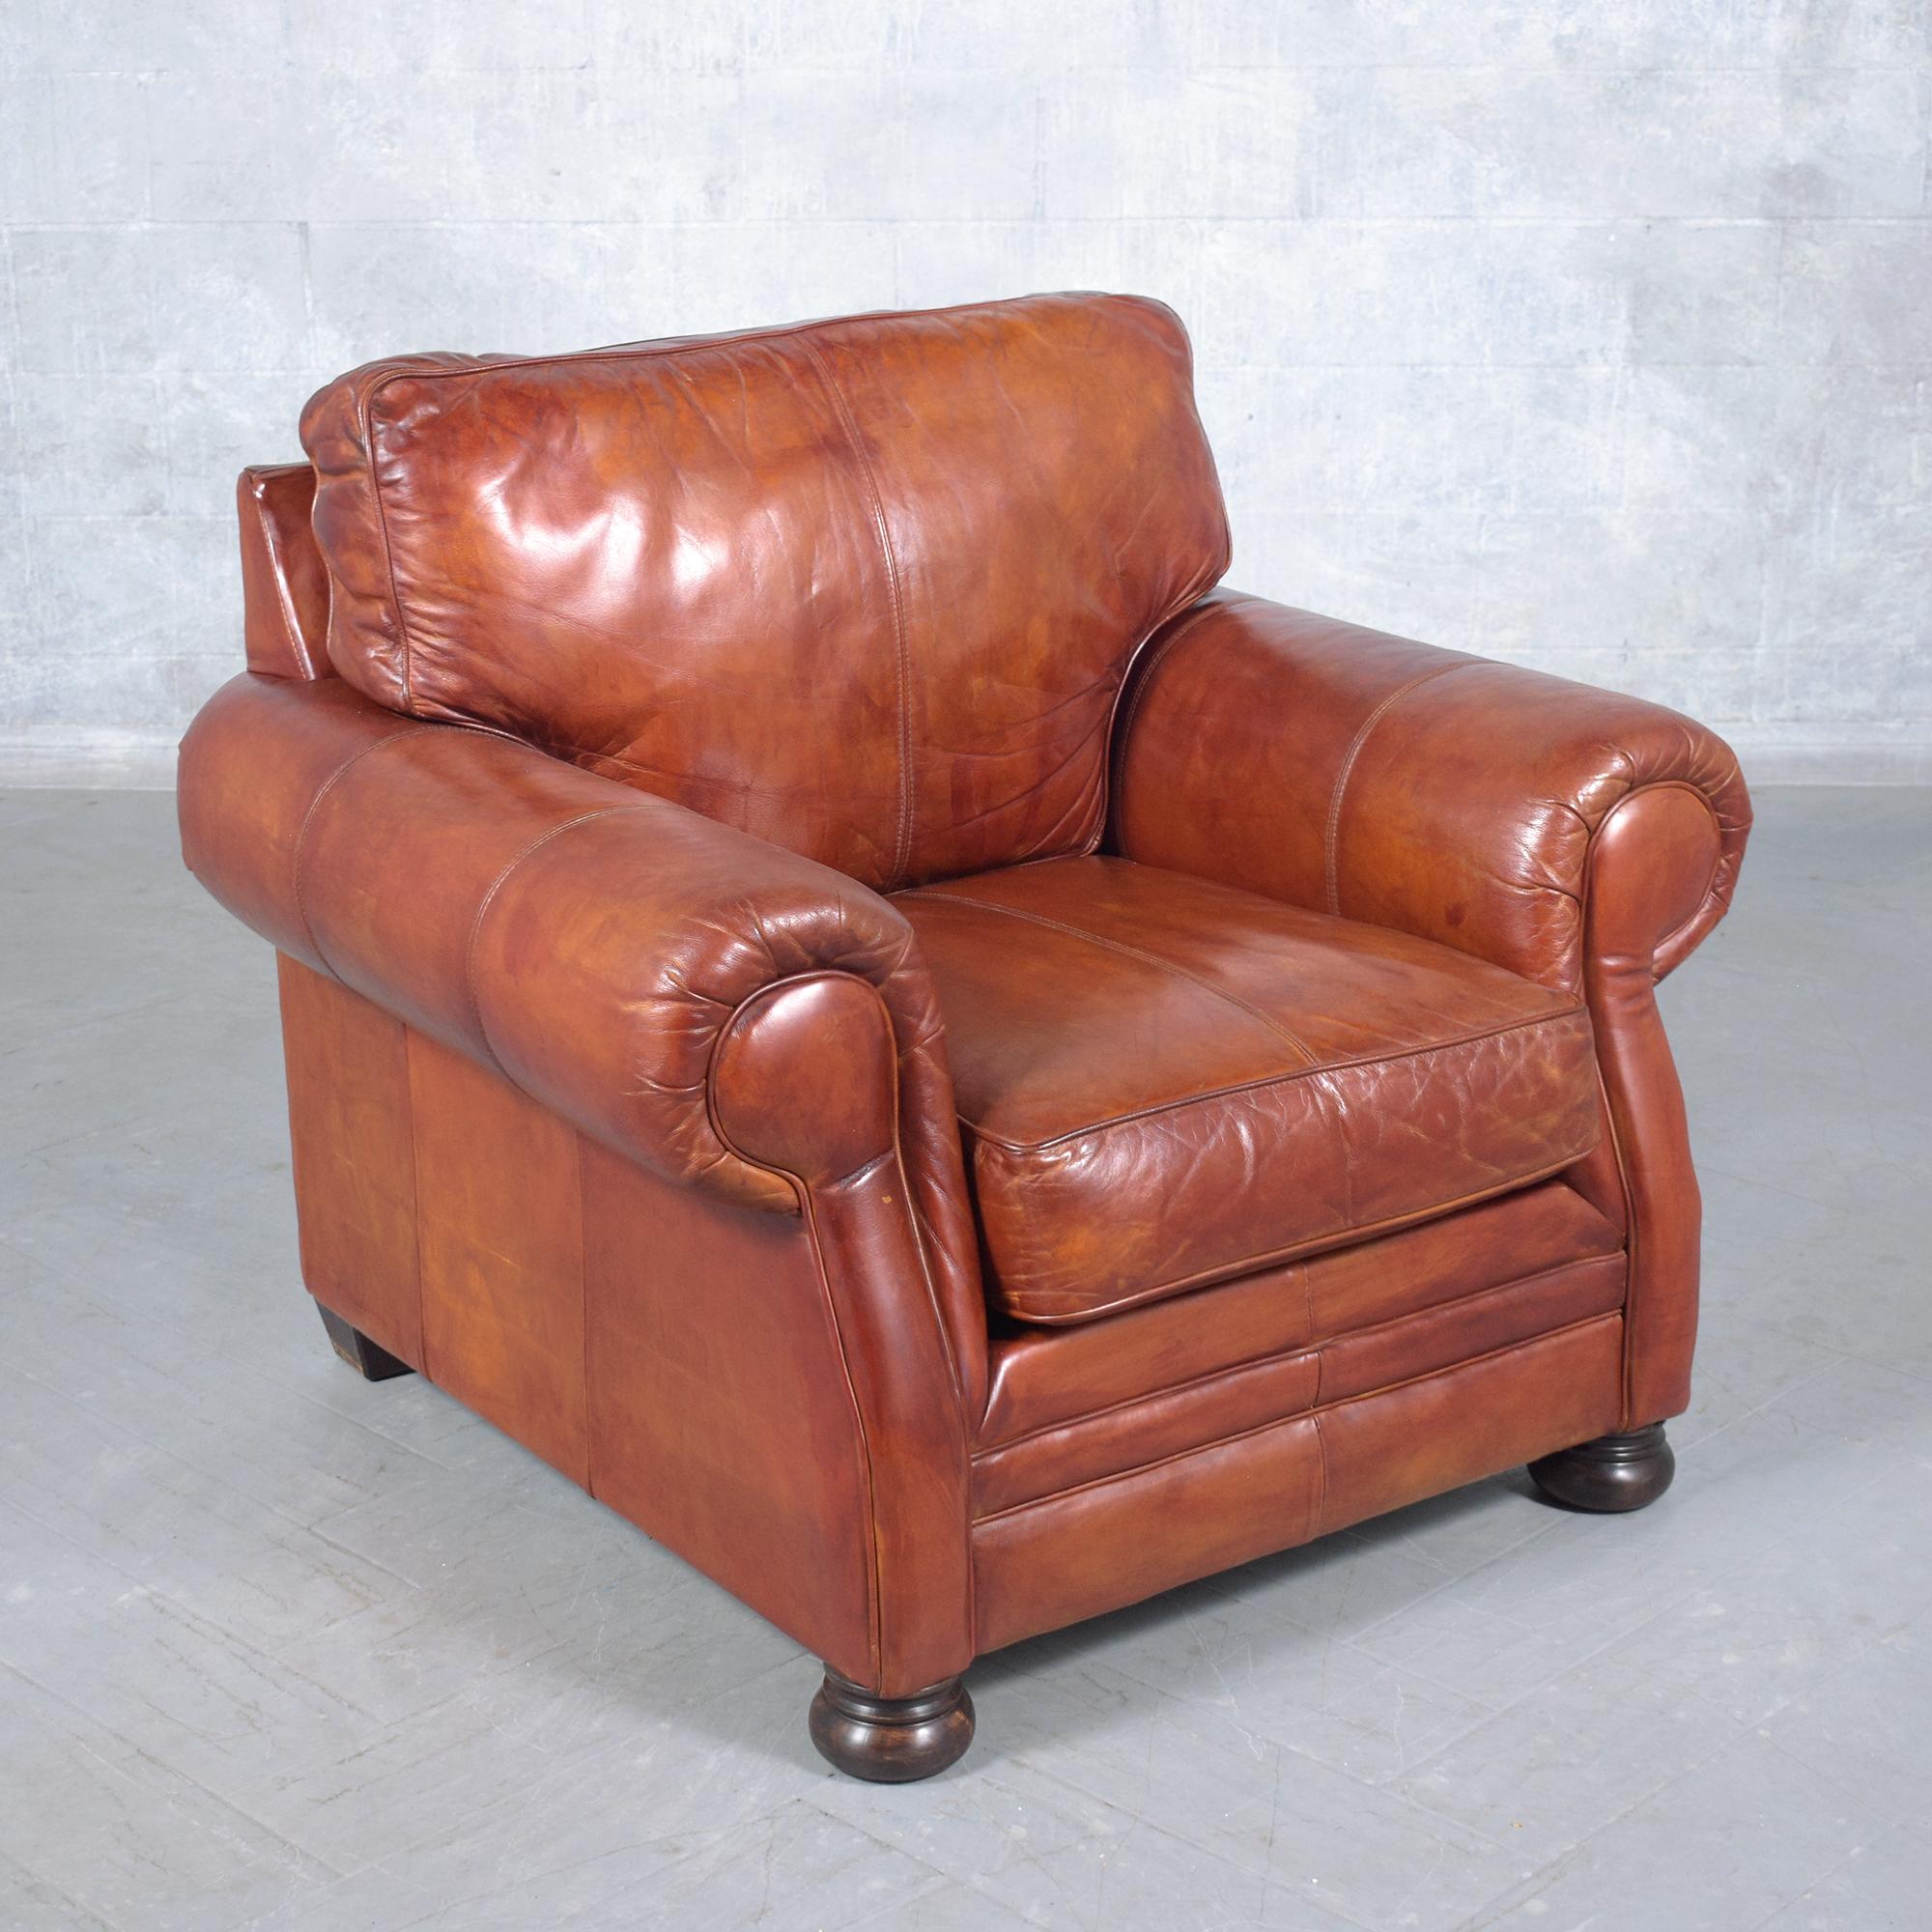 Restored Vintage Leather Armchairs in Cognac Brown with Carved Bun Legs For Sale 3